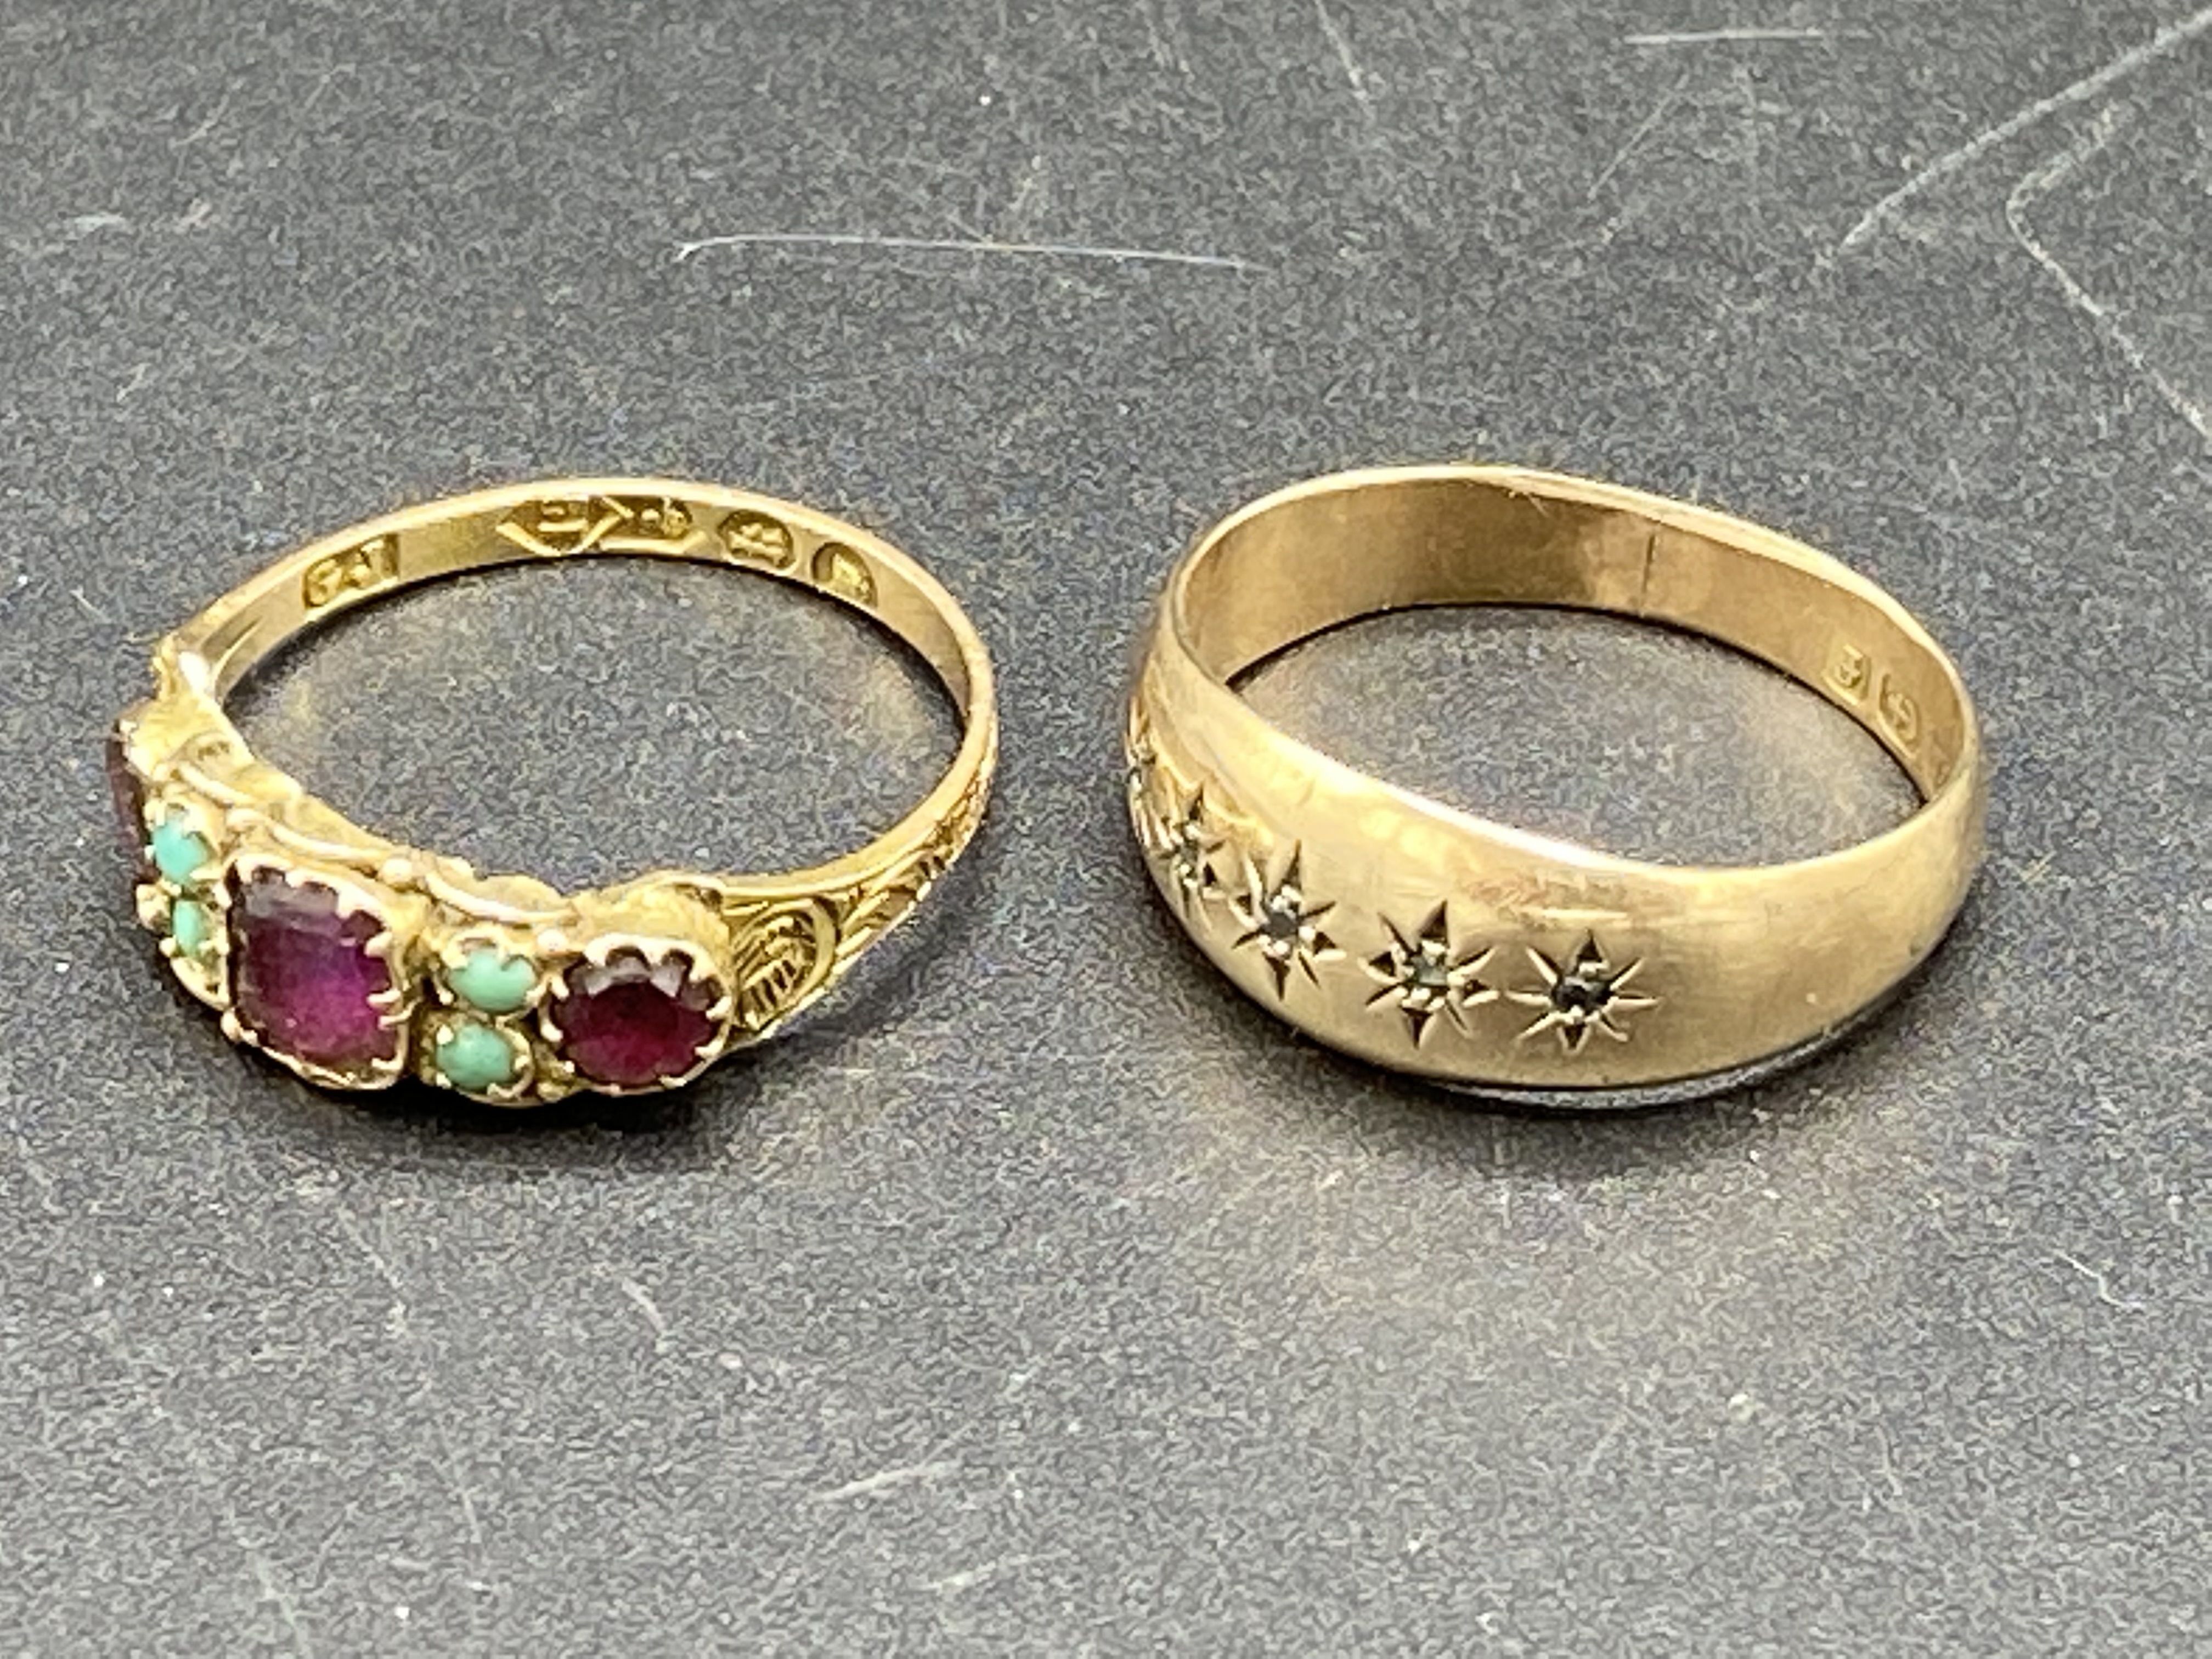 Victorian ruby and green cabochon 12ct gold ring and an Edwardian 9ct gold ring - Image 2 of 5